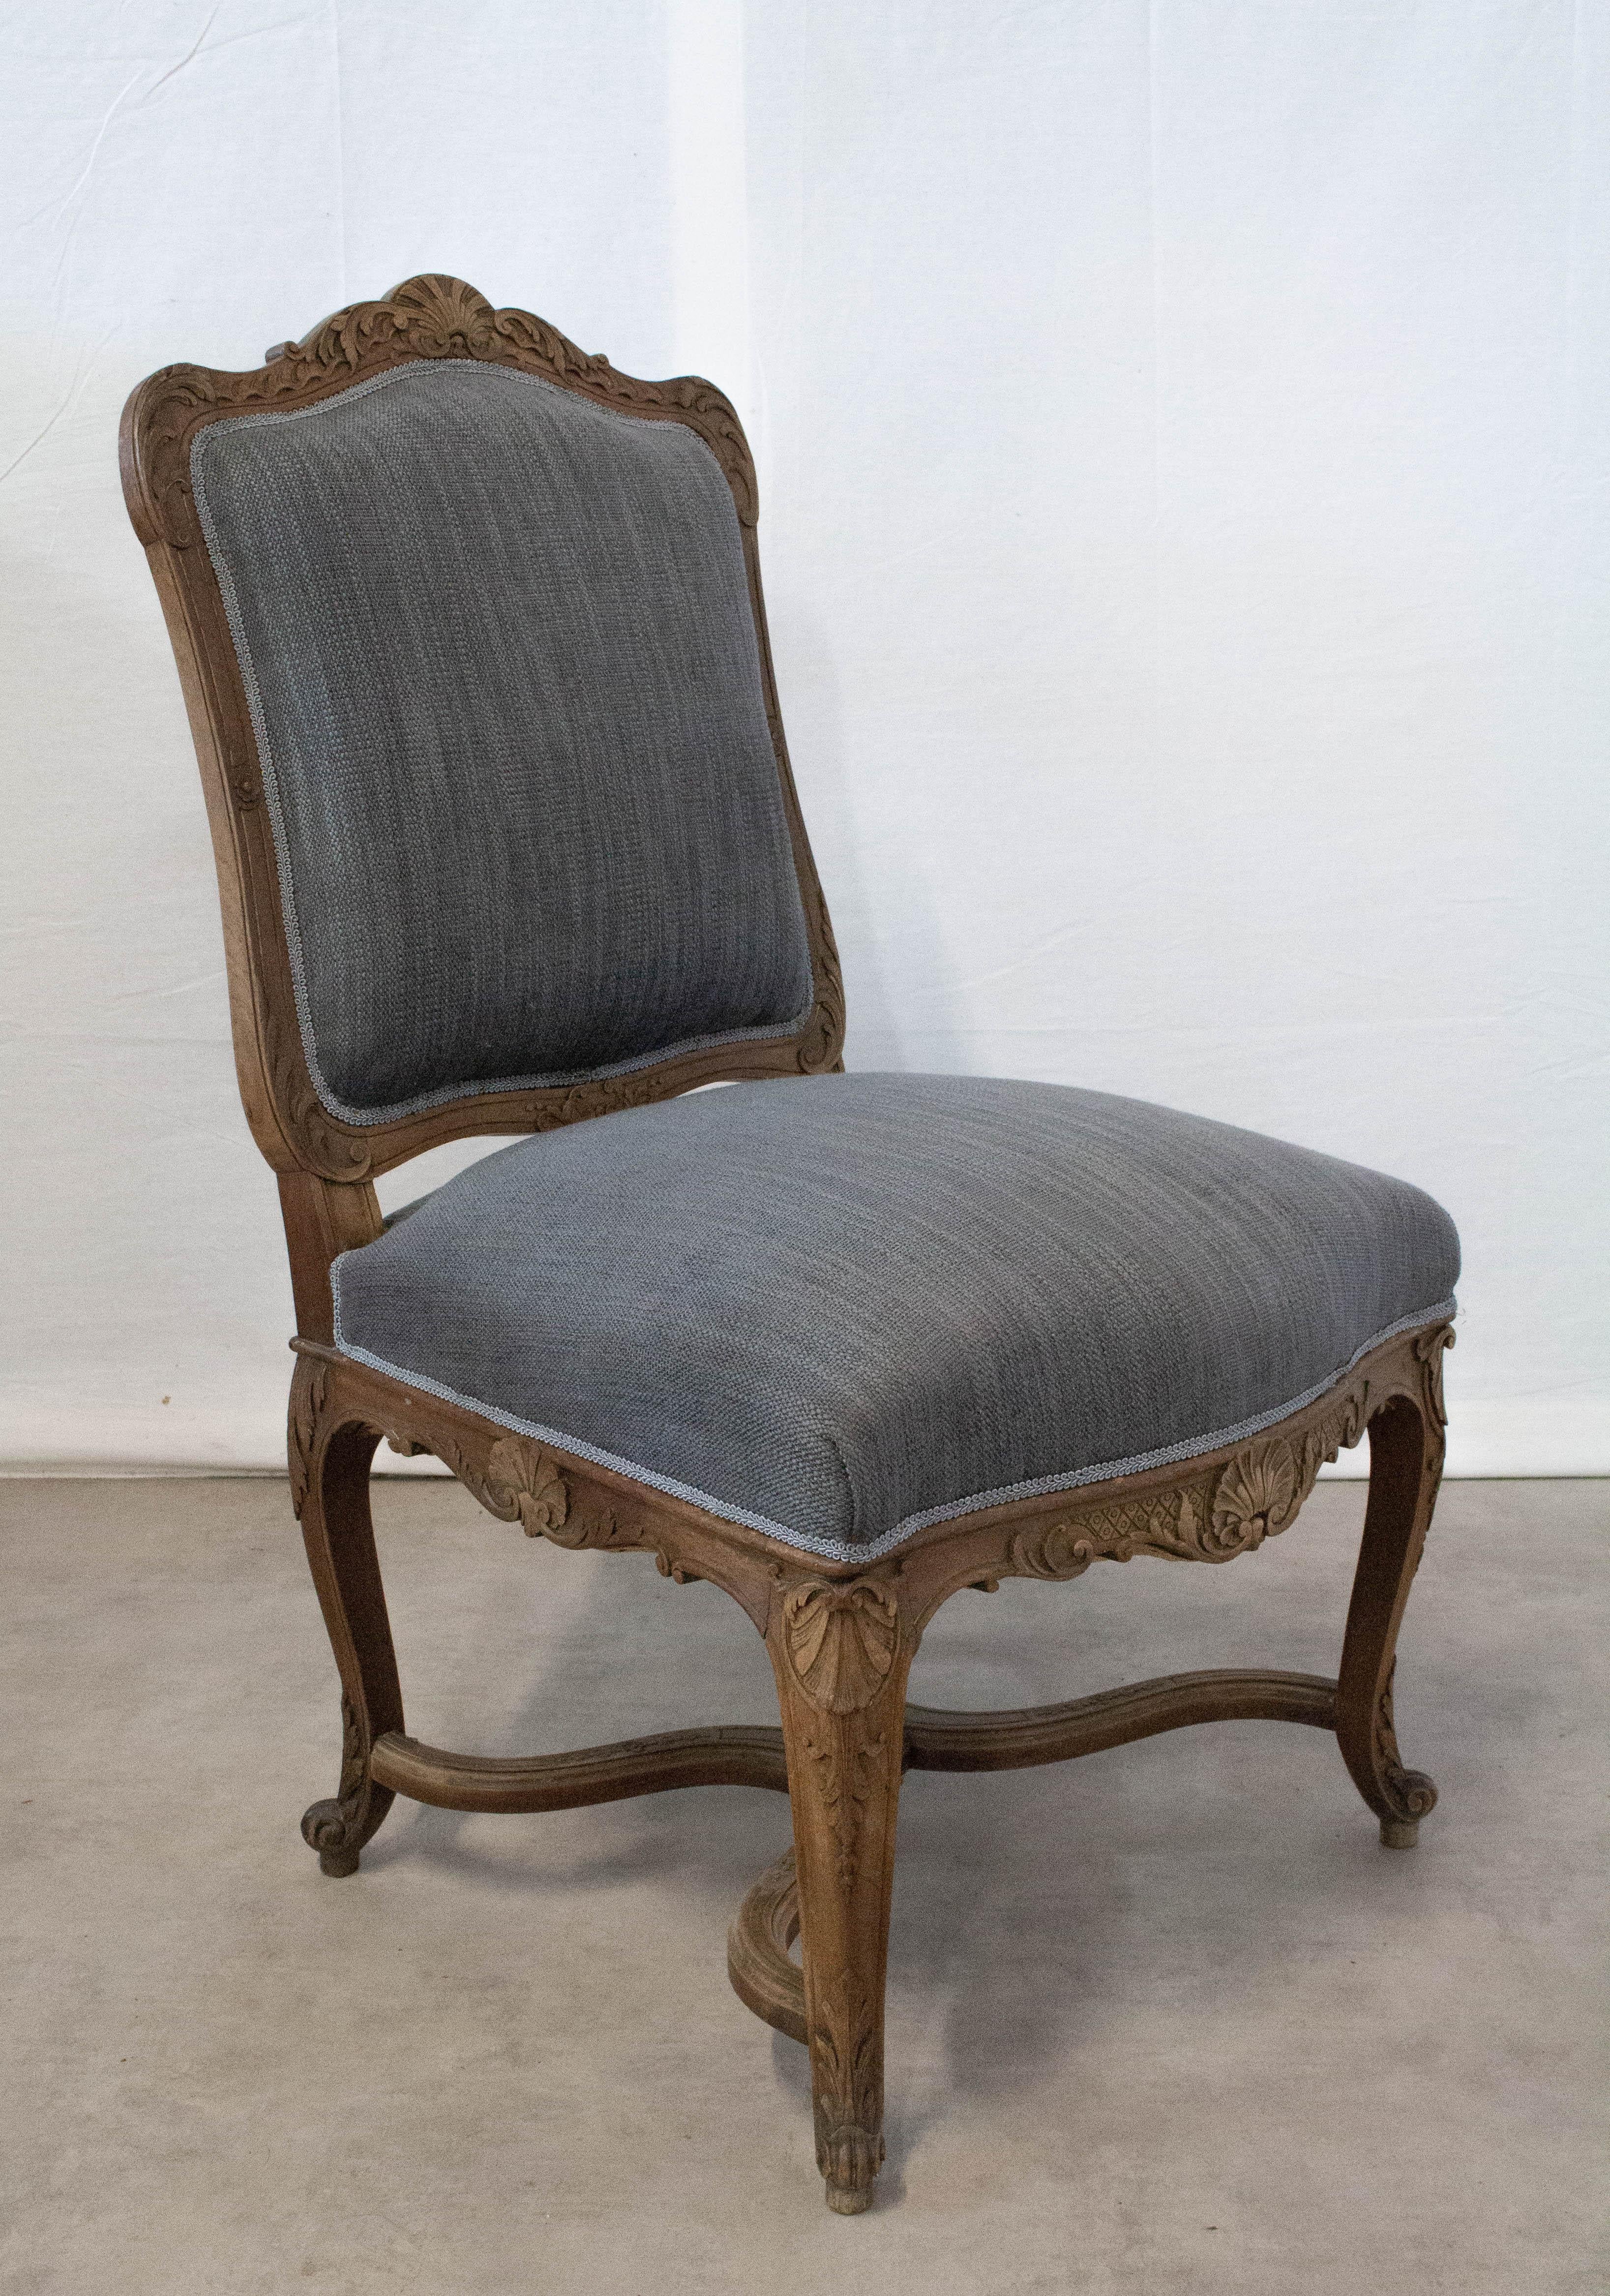 Regency Revival Pair of Regency Chairs or Fauteuils to be Re-Upholstered Midcentury For Sale